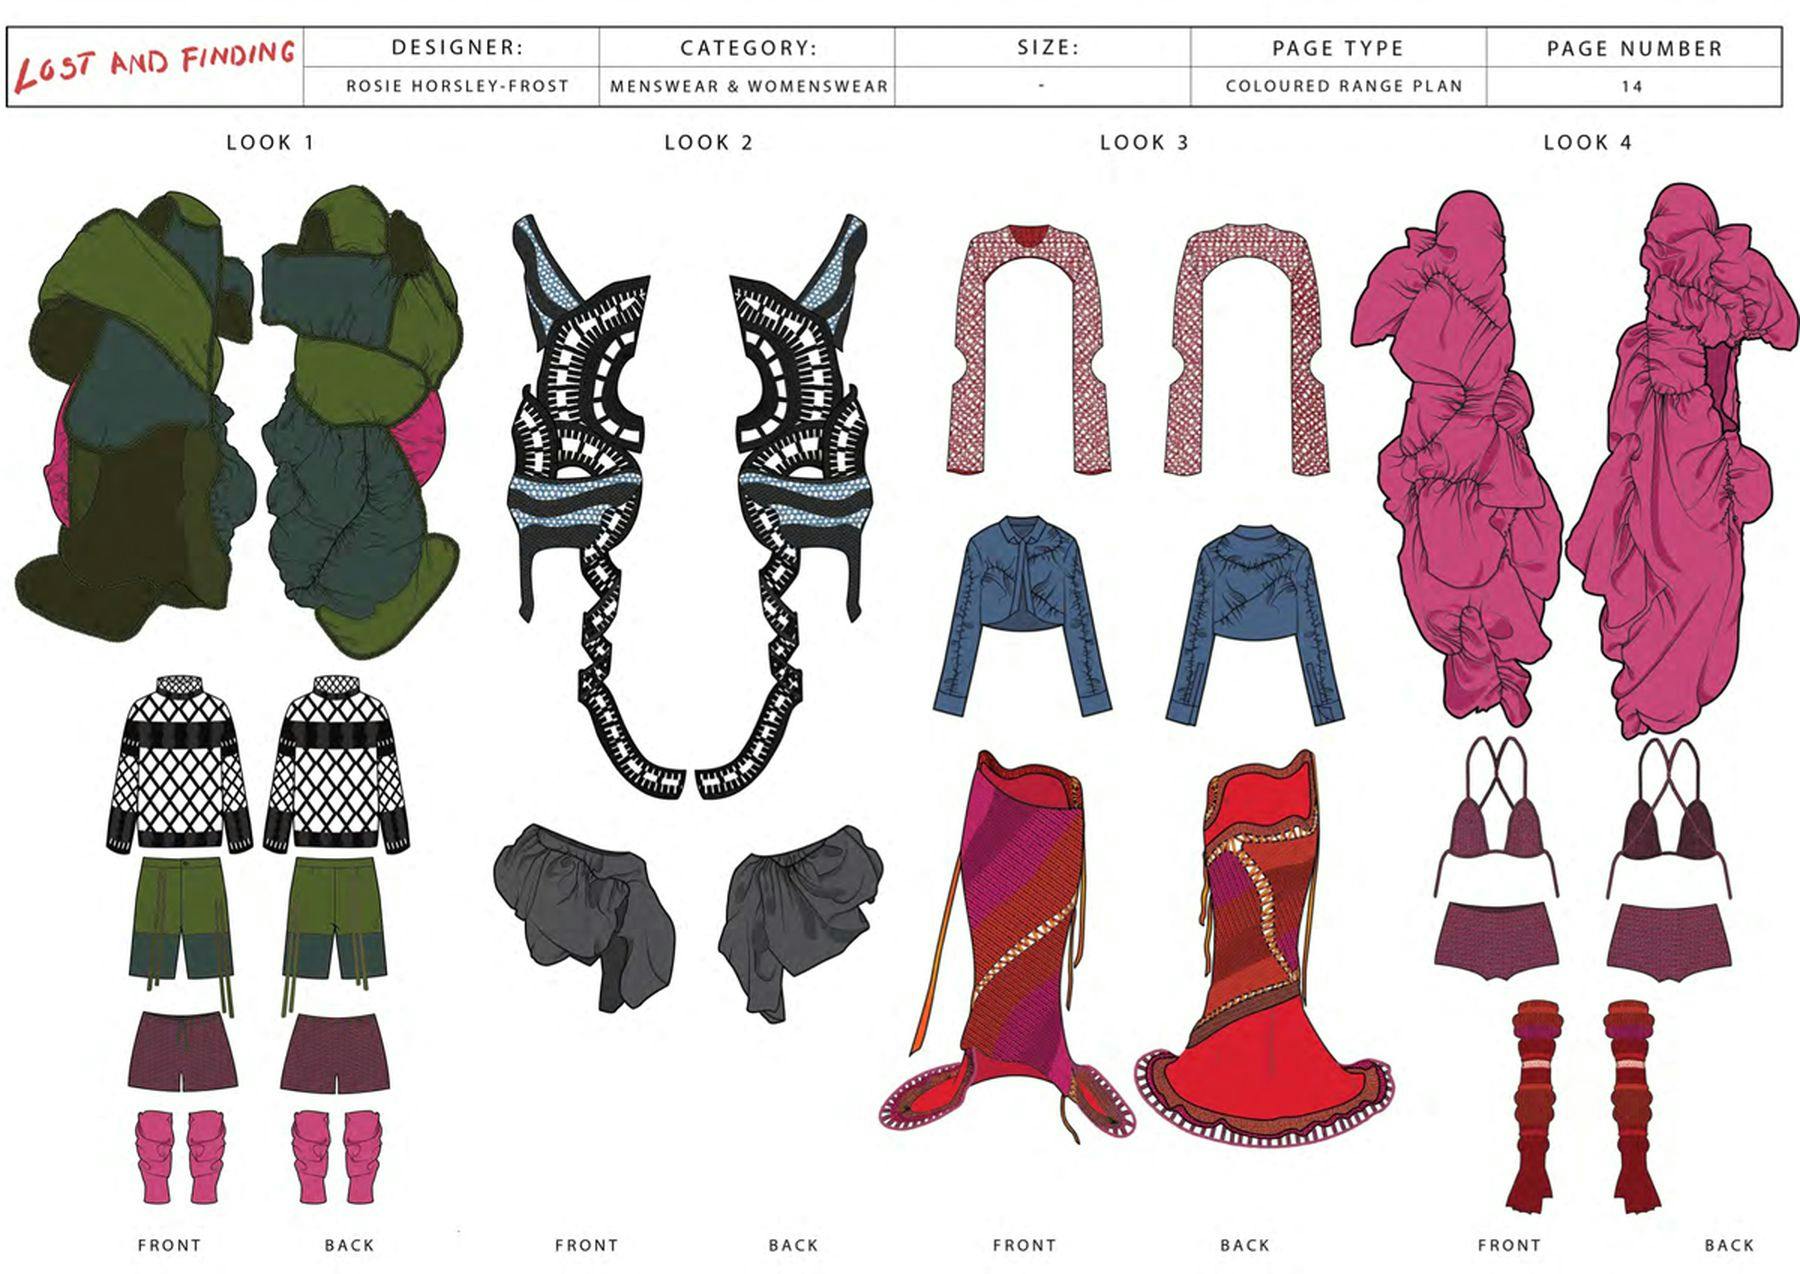 A collection of digital design drawings titled Lost and Finding by Rosie Worsley-Frost. The designs are categorised as menswear and womenswear. Items include jumpers, shorts, bikinis, shorts, jackets, crop tops with long sleeves and full-length skirts. The main colour schemes include green, red, fuchsia, blue, grey and monochrome.